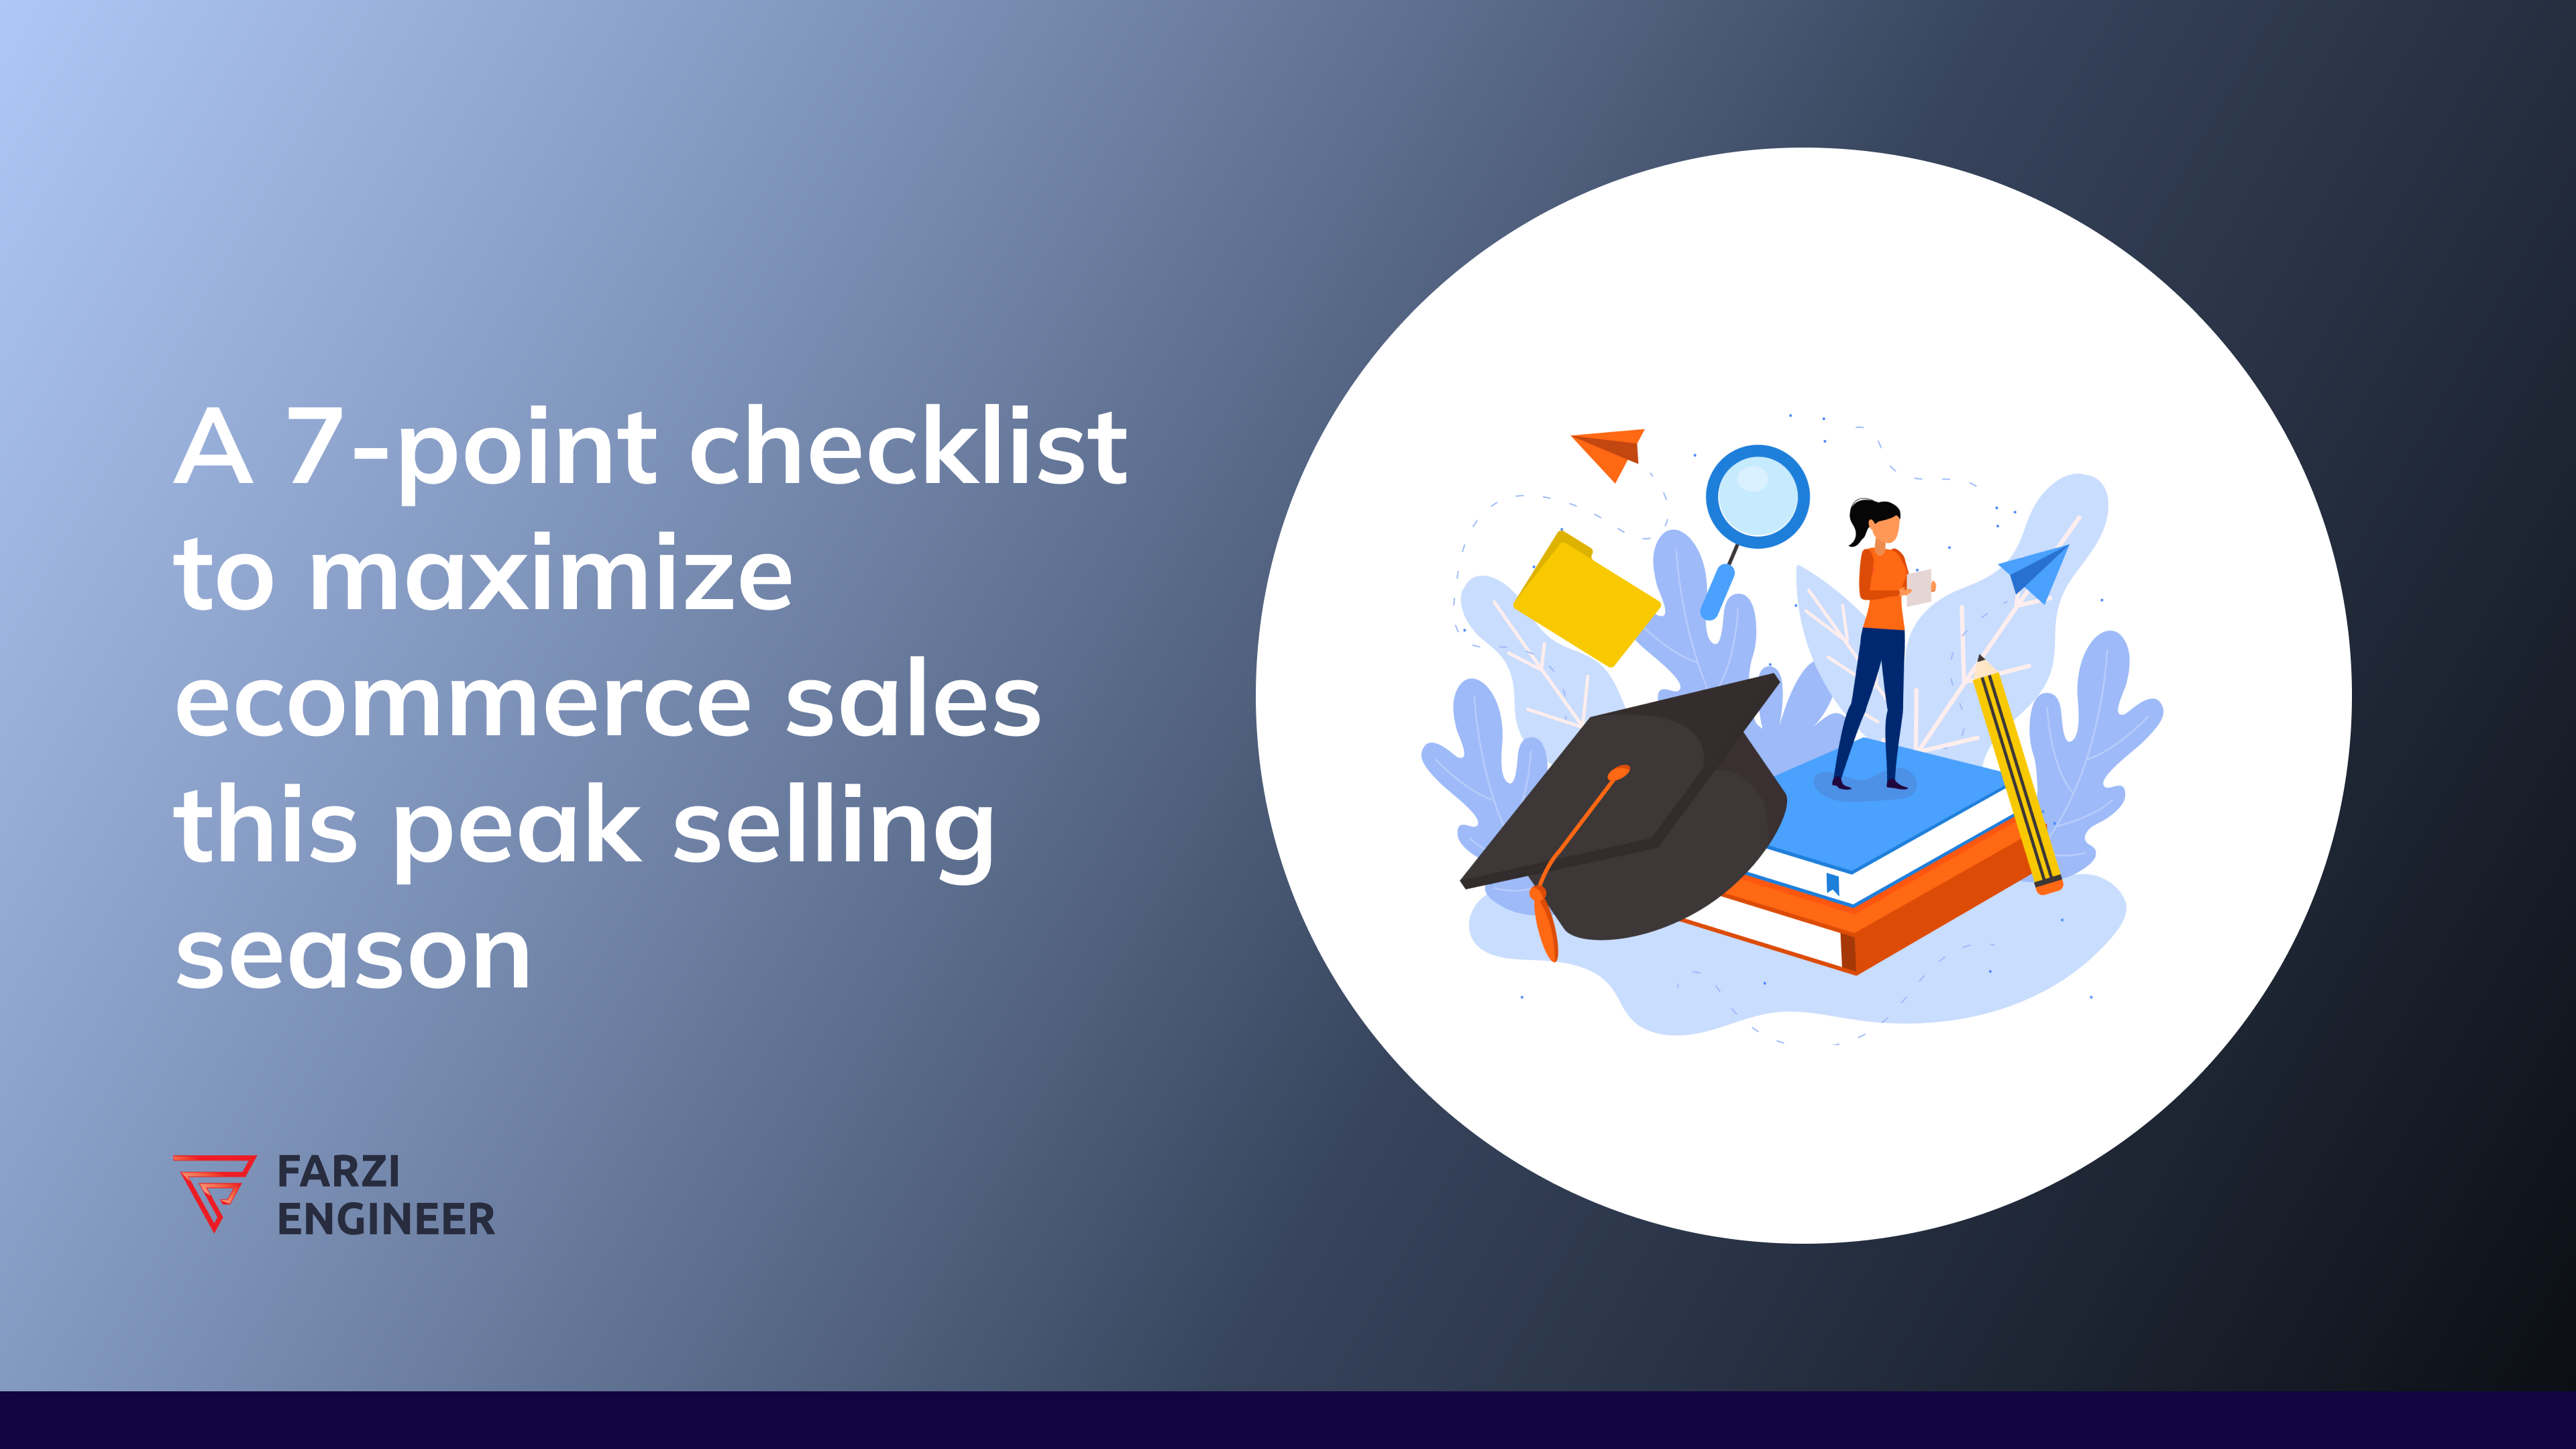 A 7-point checklist to maximize ecommerce sales this peak selling season